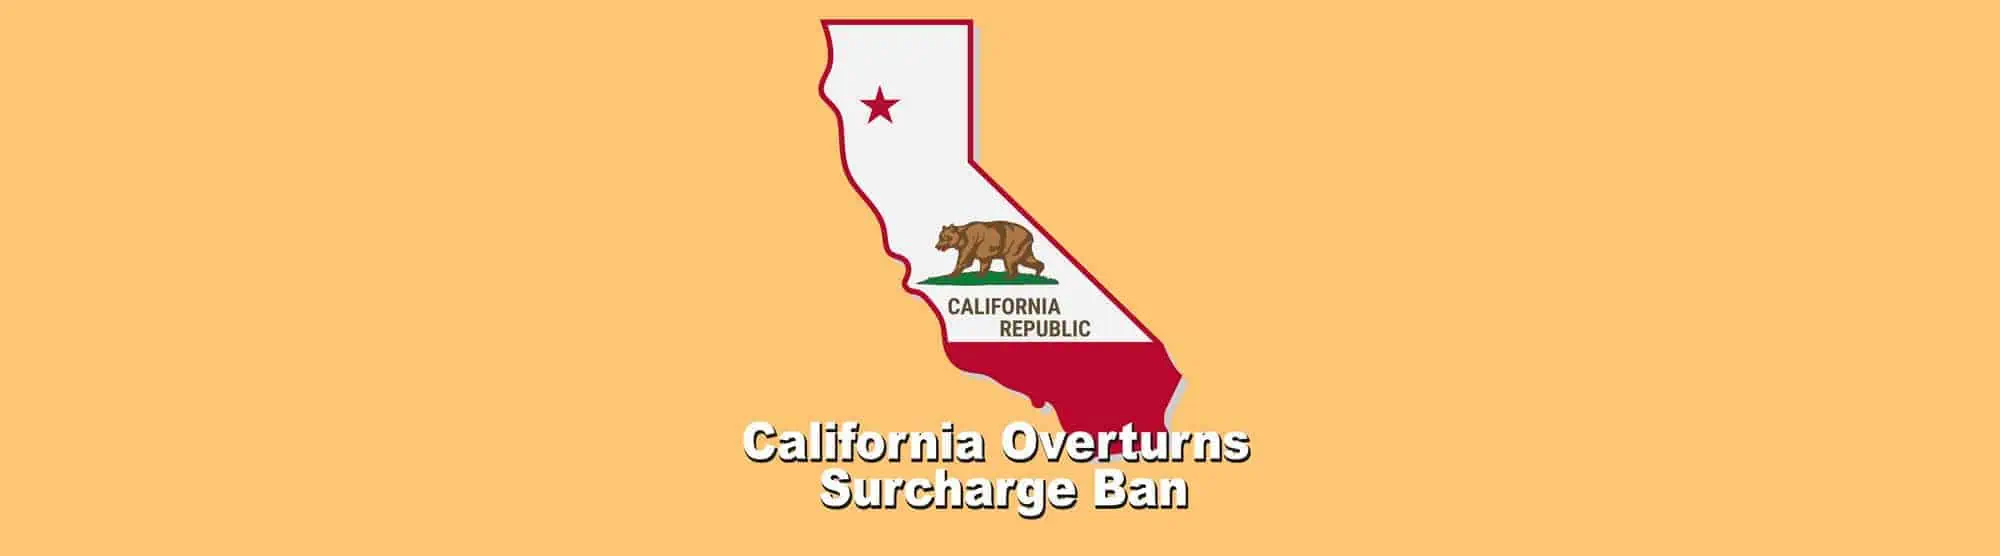 California Overturns Surcharge Ban